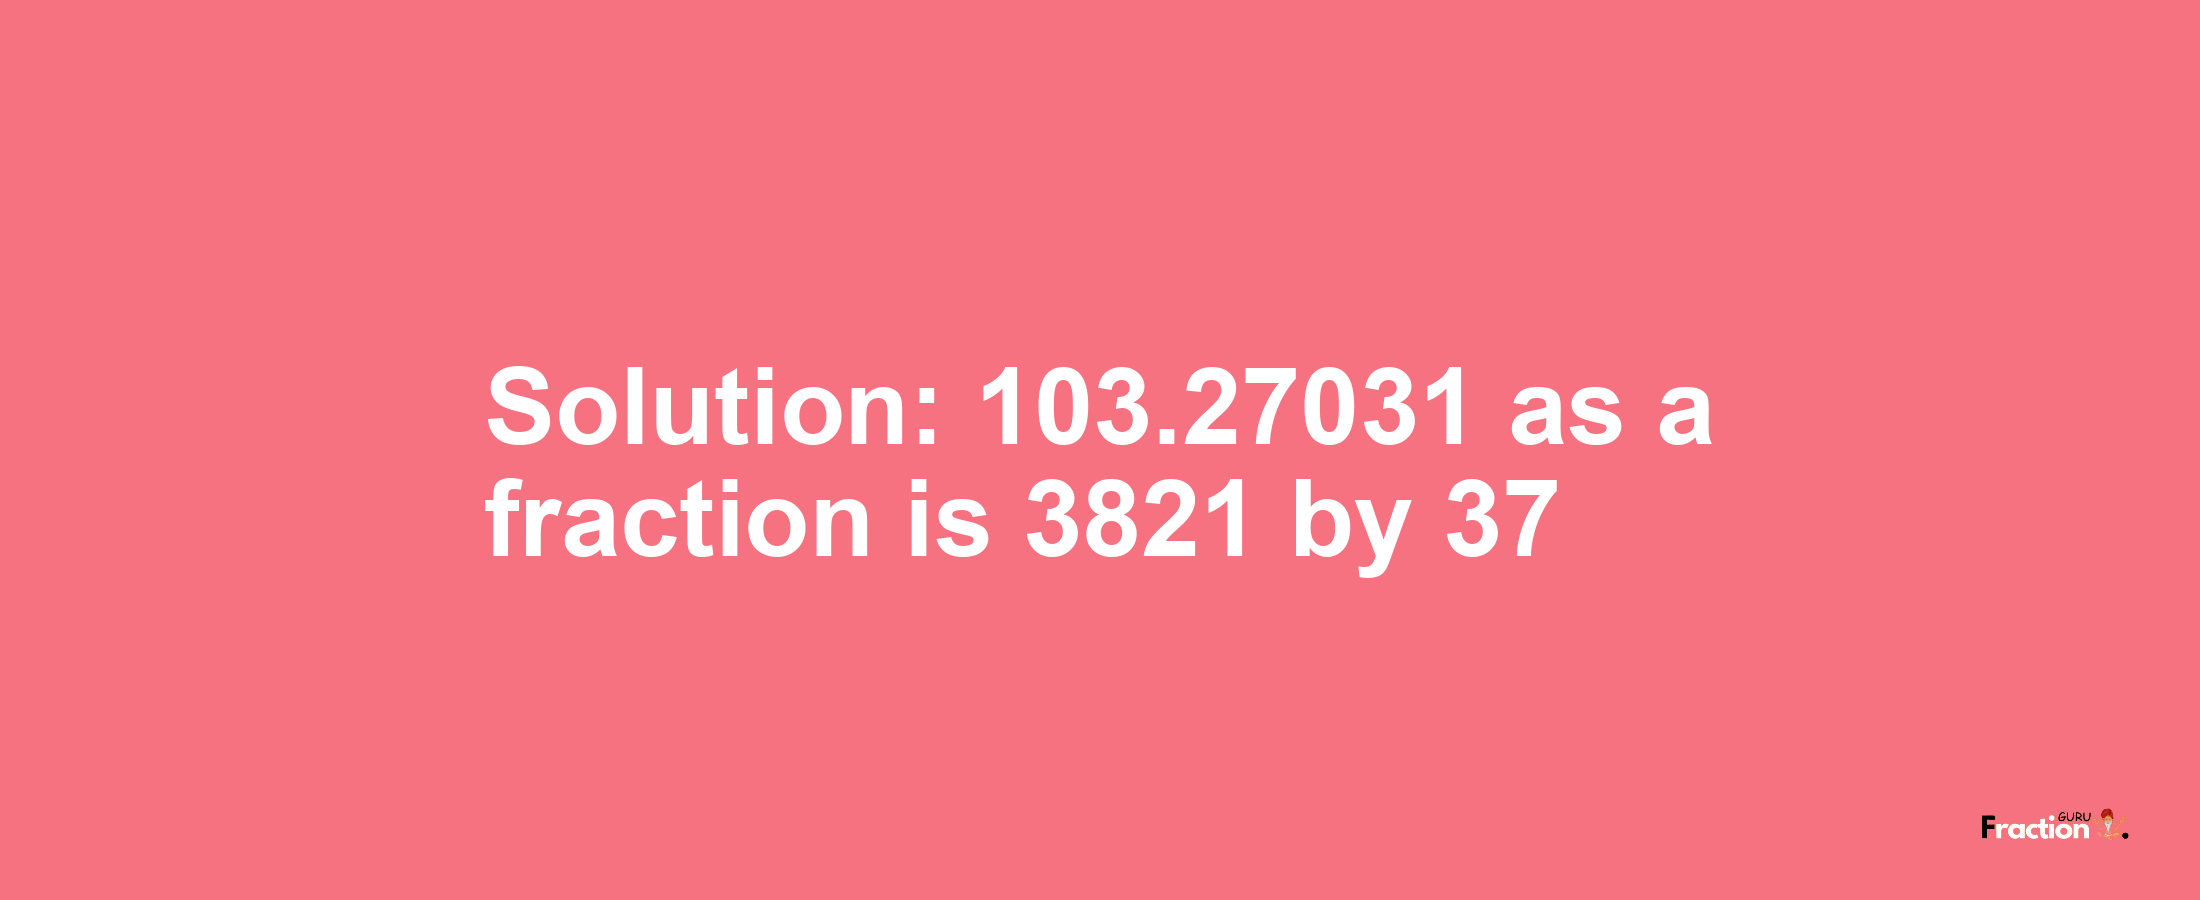 Solution:103.27031 as a fraction is 3821/37